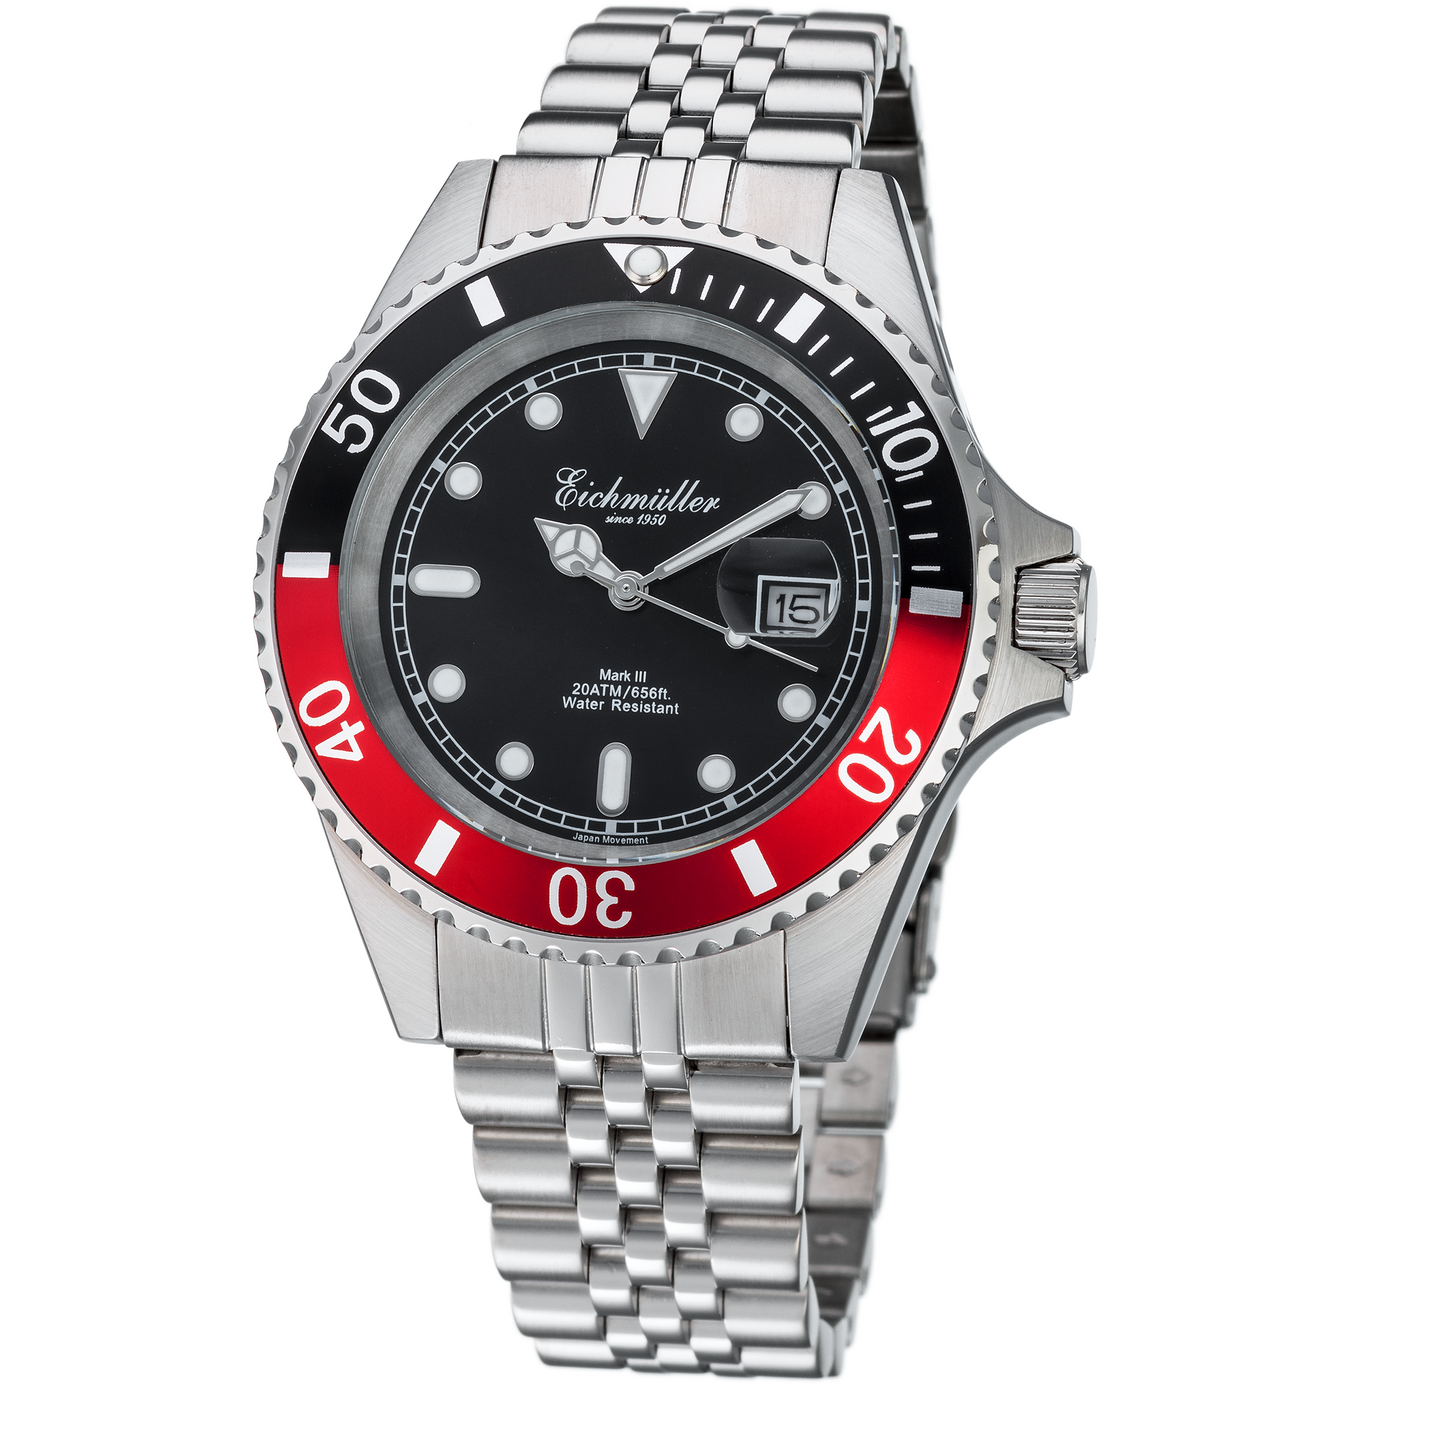 EICHMULLER since 1950 Mark III Diver 20ATM Silver/Pepsi Watch